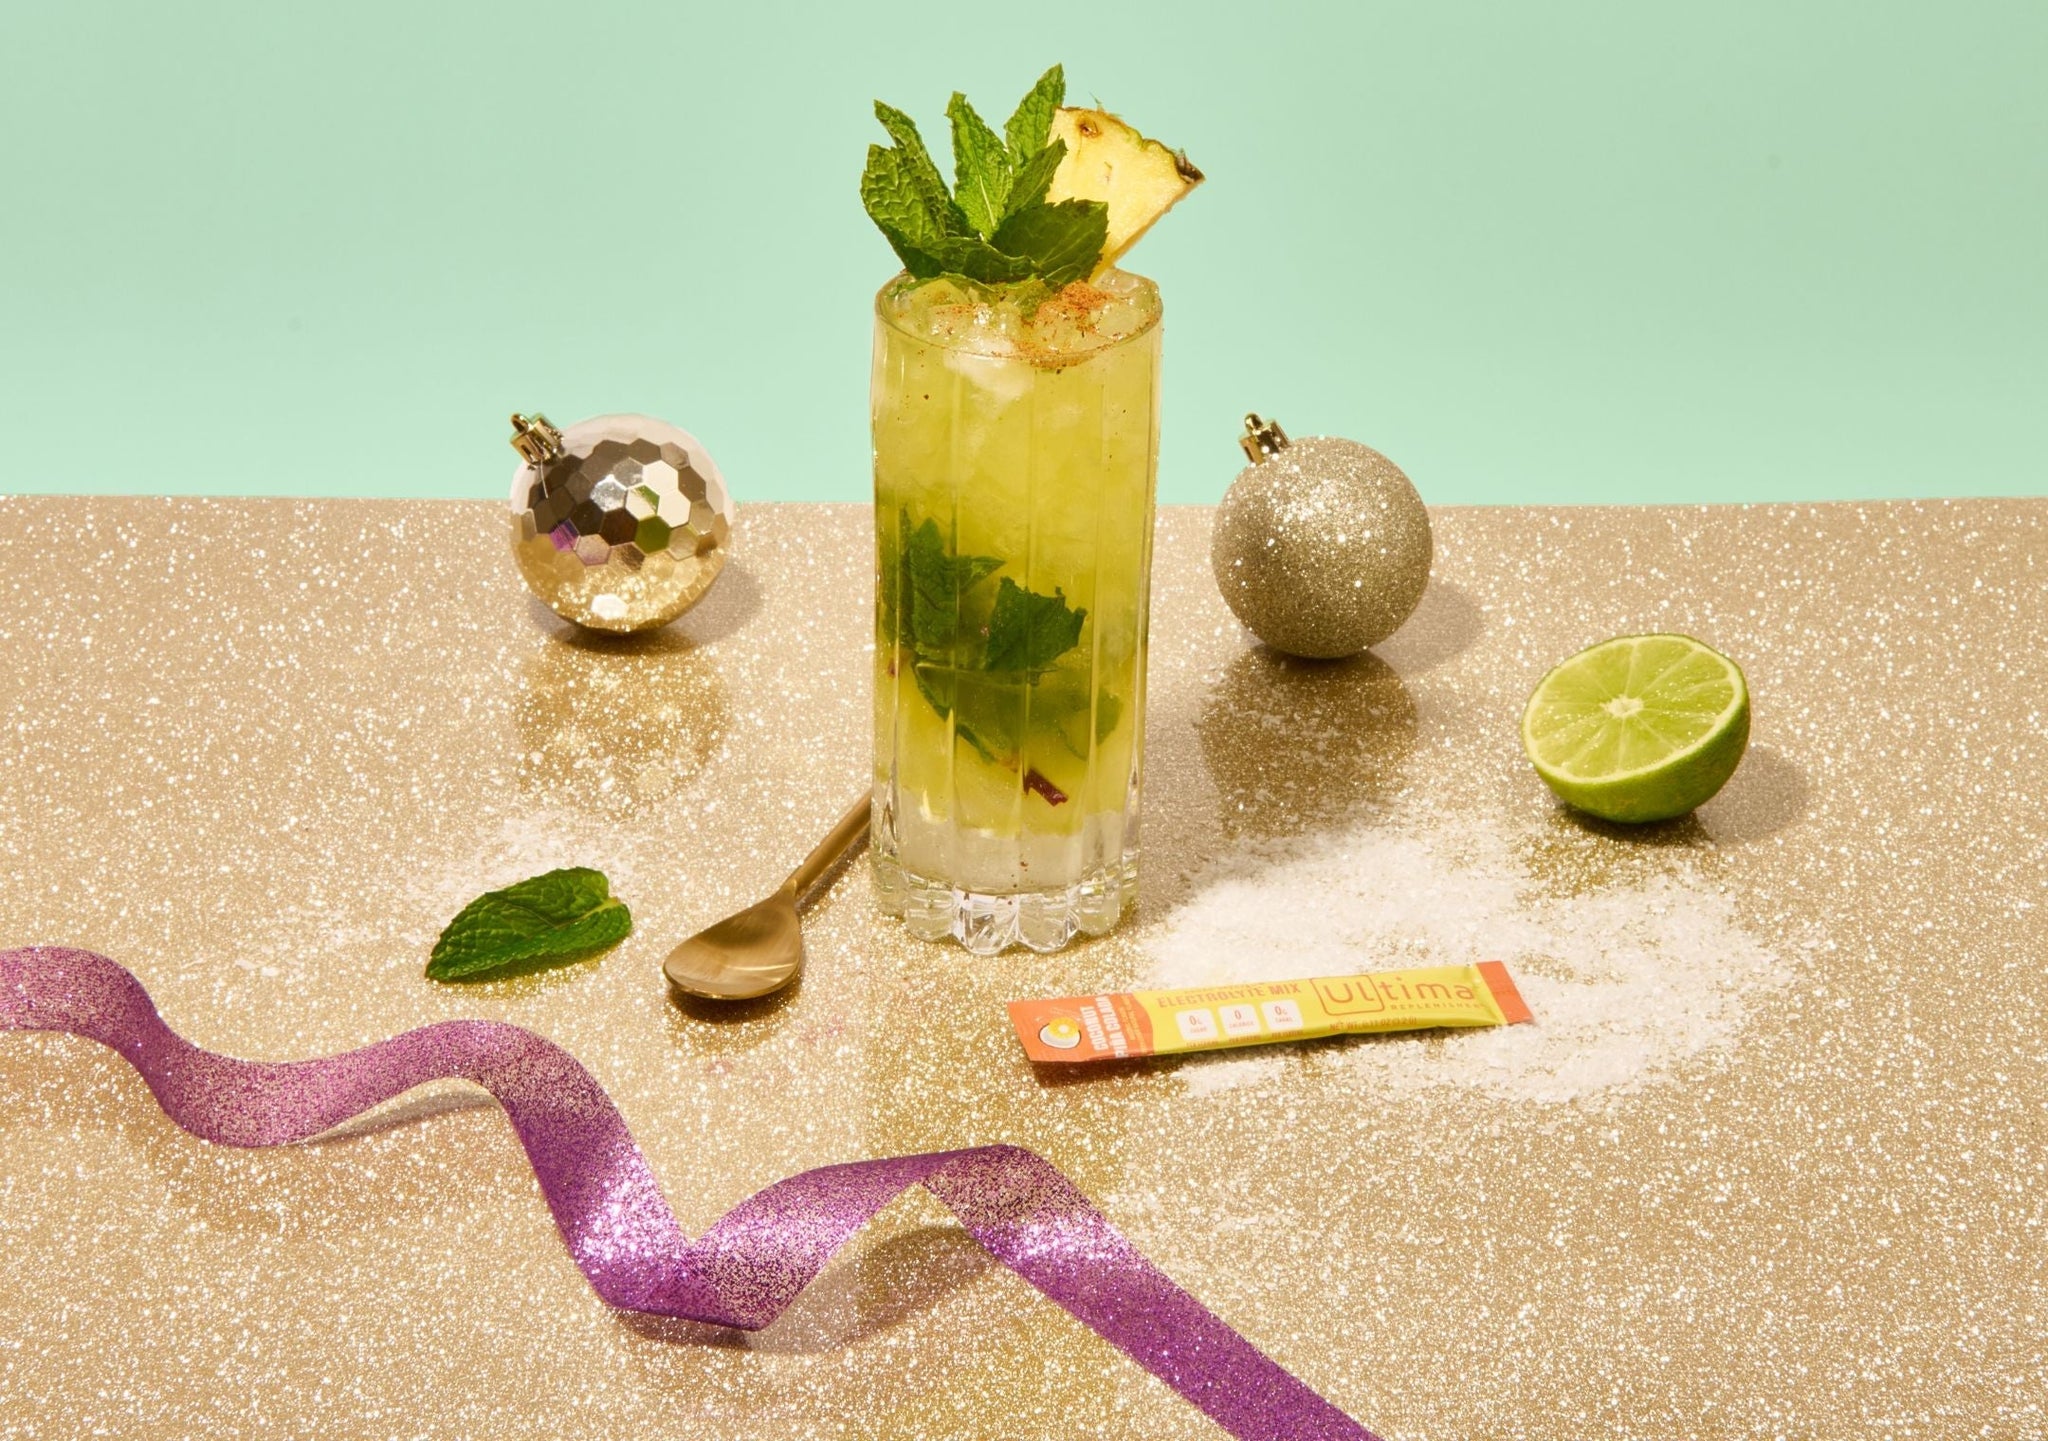 Holiday in the Tropics Cocktail Recipe